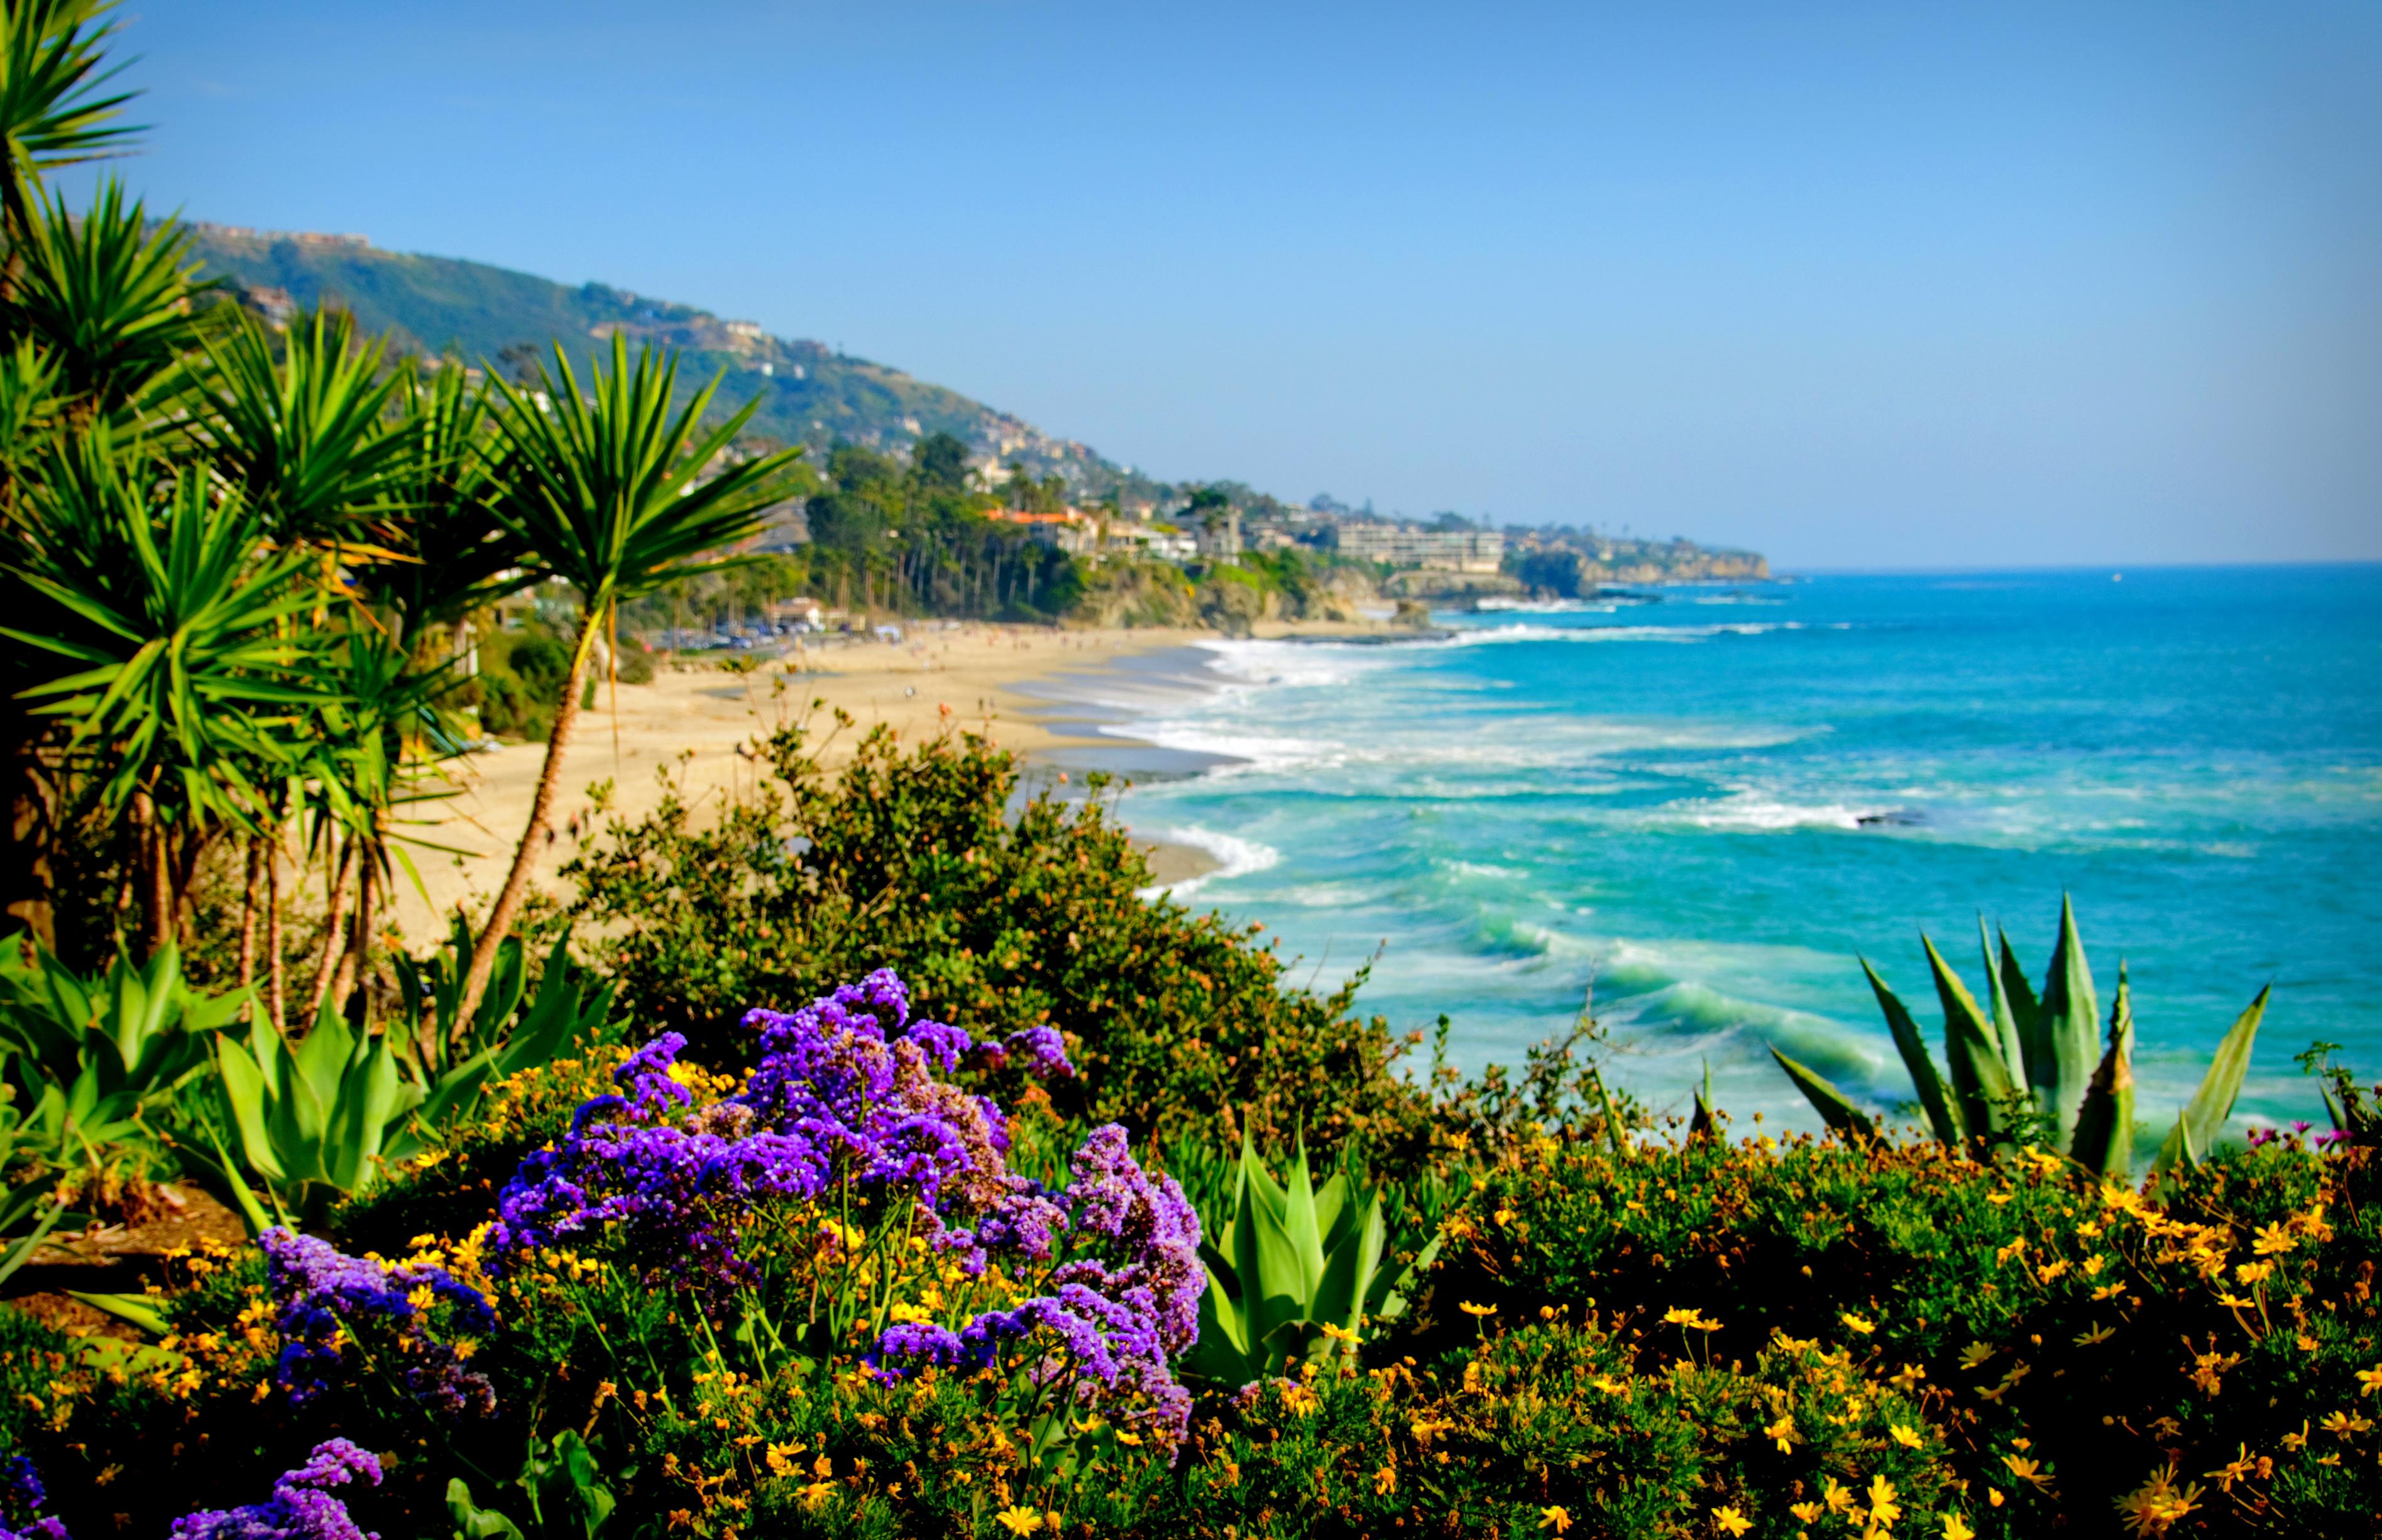 beach california   143380   High Quality and Resolution Wallpapers 3790x2451